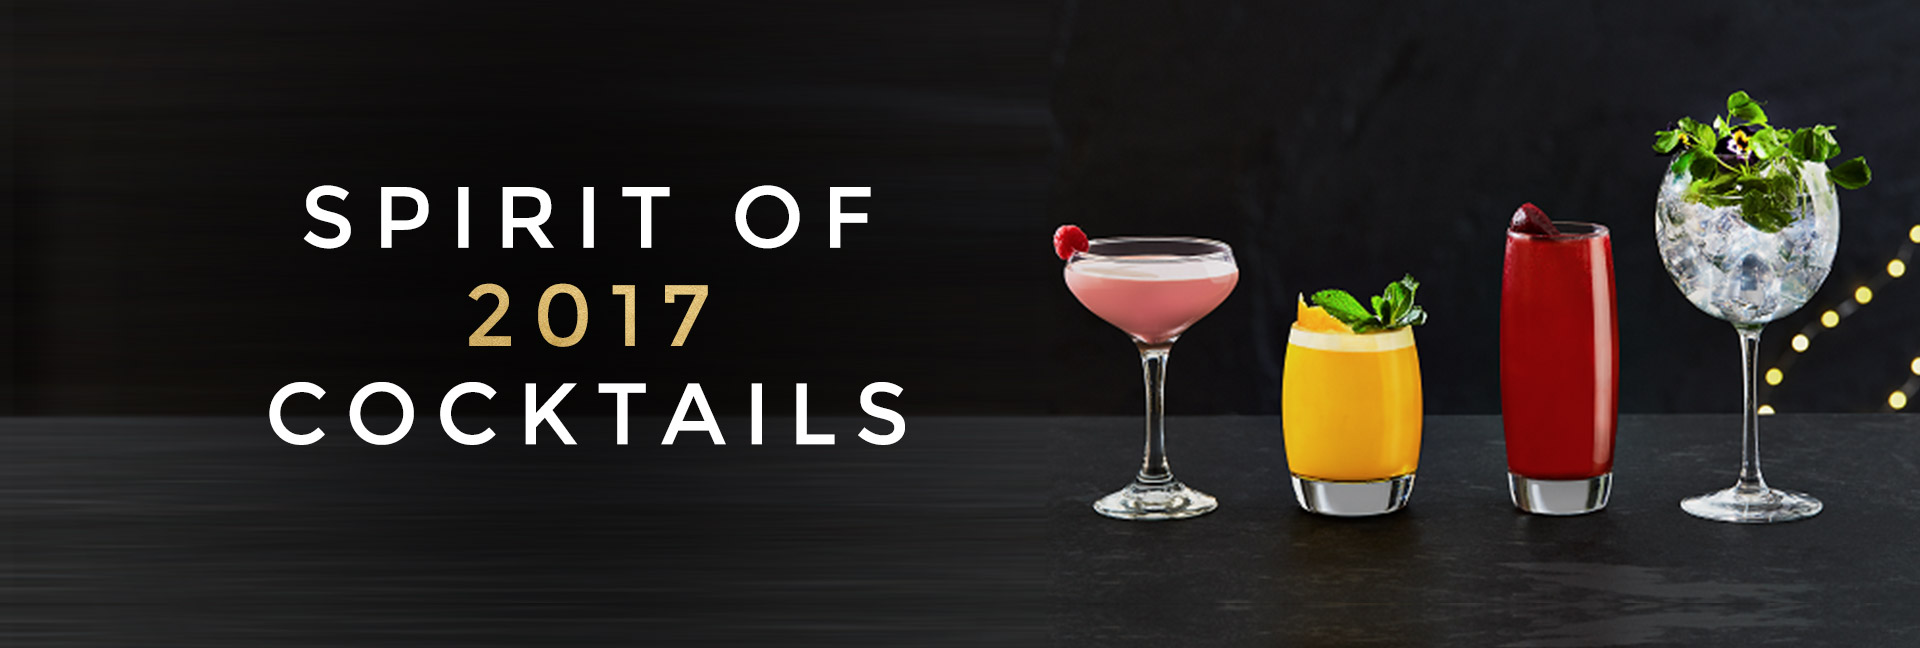 Spirit of 2017 cocktails at All Bar One Tower of London